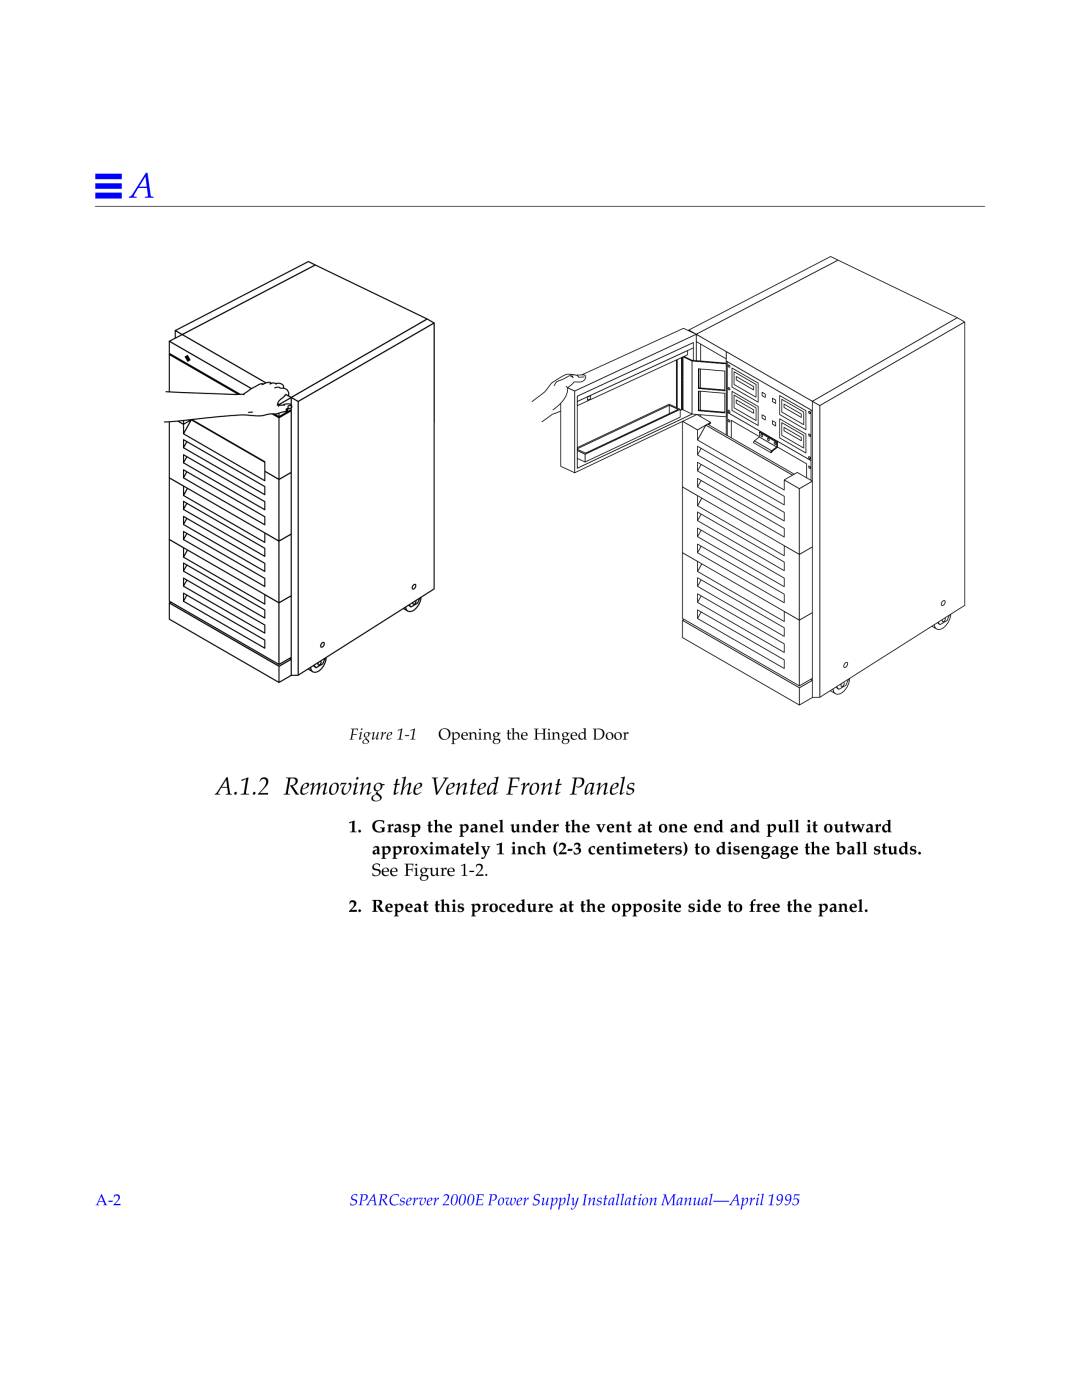 Sun Microsystems A.1.2 Removing the Vented Front Panels, SPARCserver 2000E Power Supply Installation Manual-April 